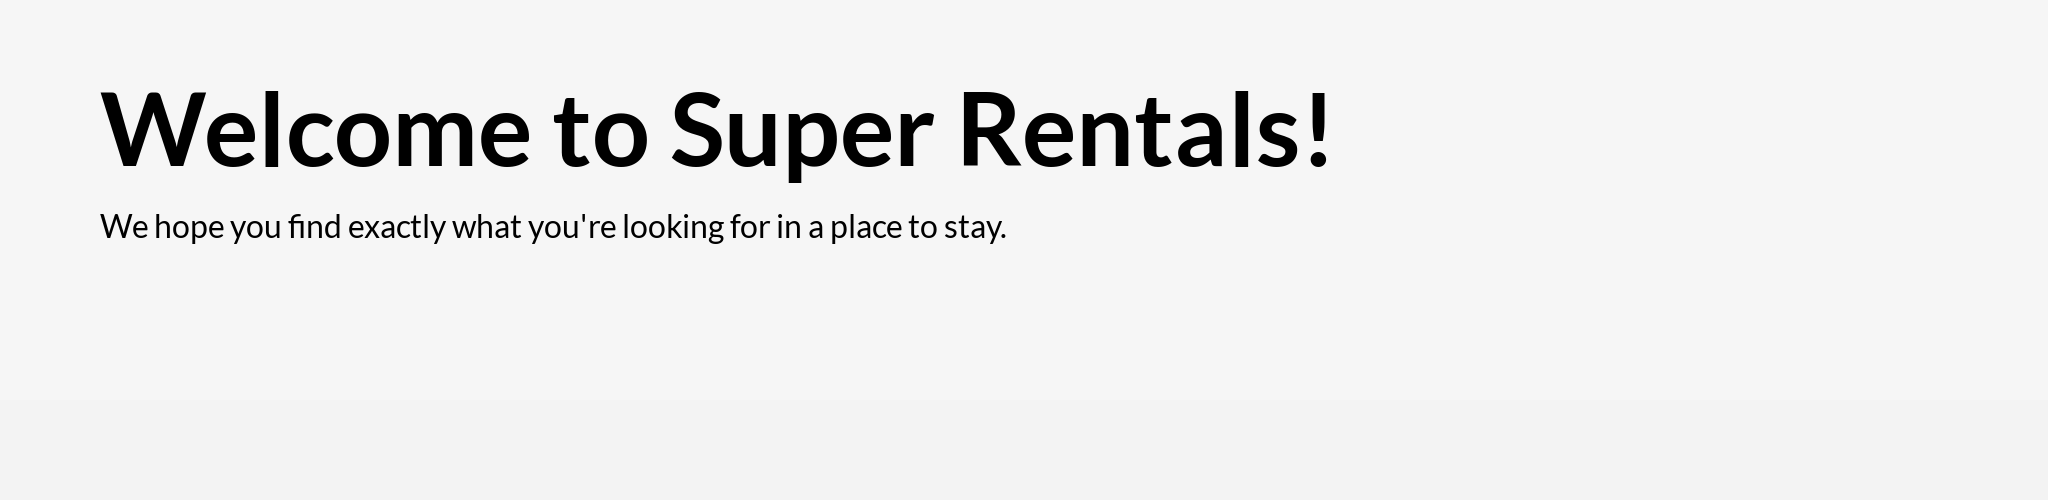 Welcome to Super Rentals! (styled)